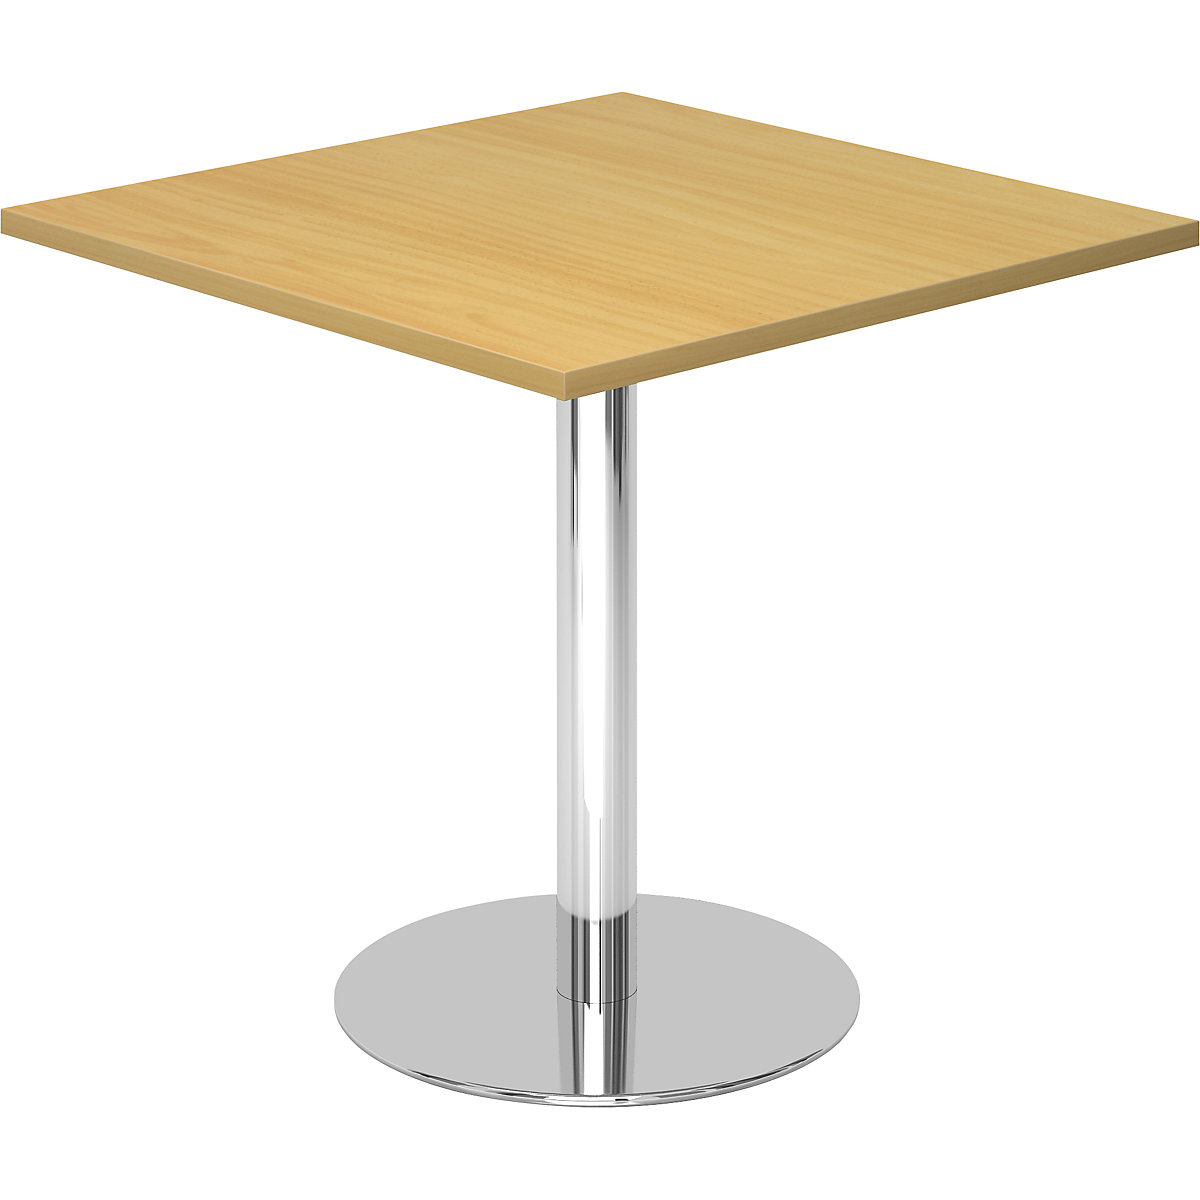 Conference table, LxW 800 x 800 mm